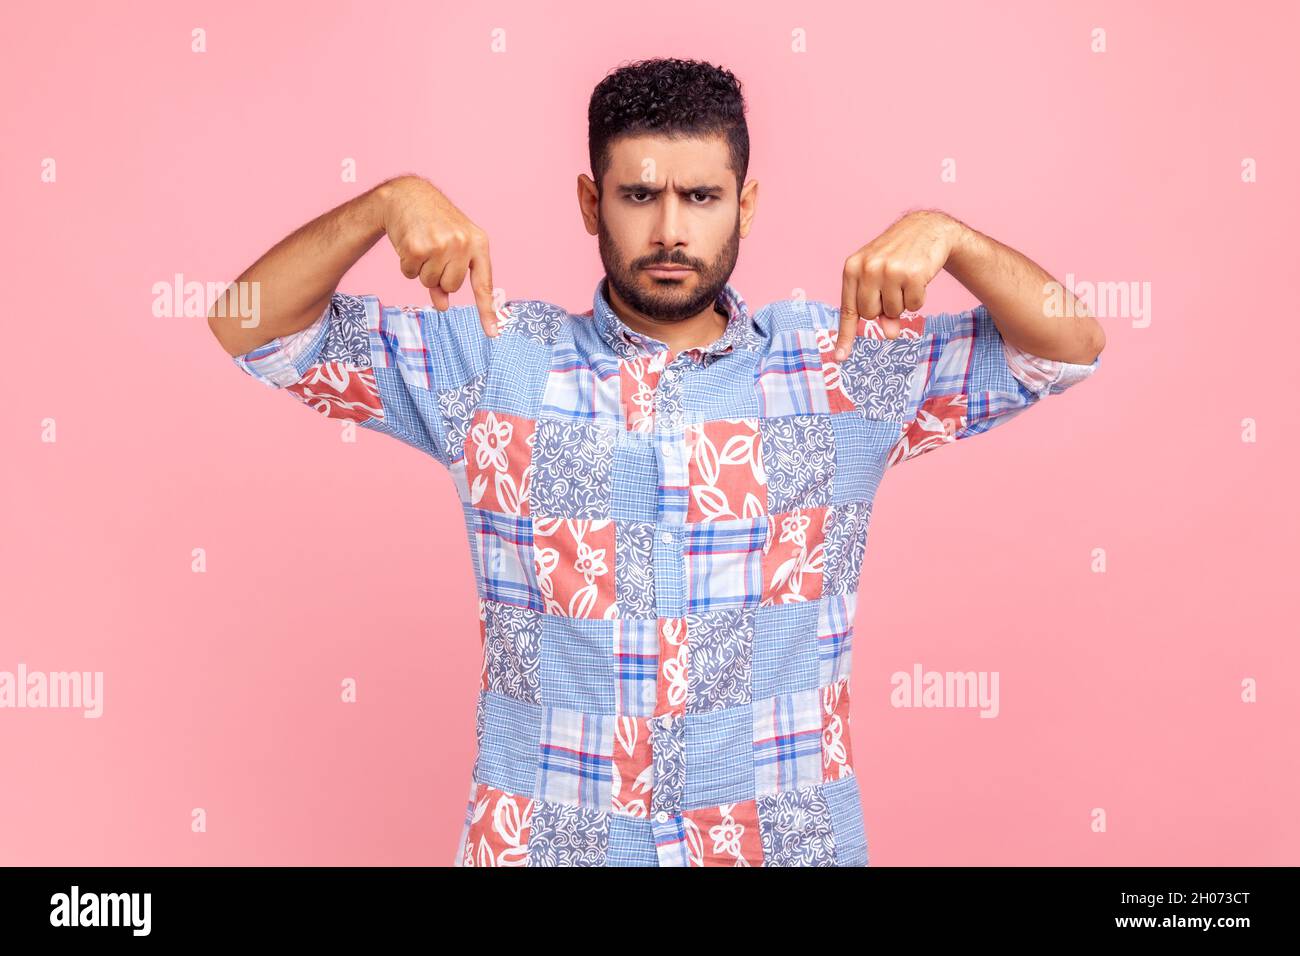 Here and now. Strict bearded handsome man pointing finger down, looking at camera with serious bossy facial expression, wearing blue casual shirt. Indoor studio shot isolated on pink background. Stock Photo